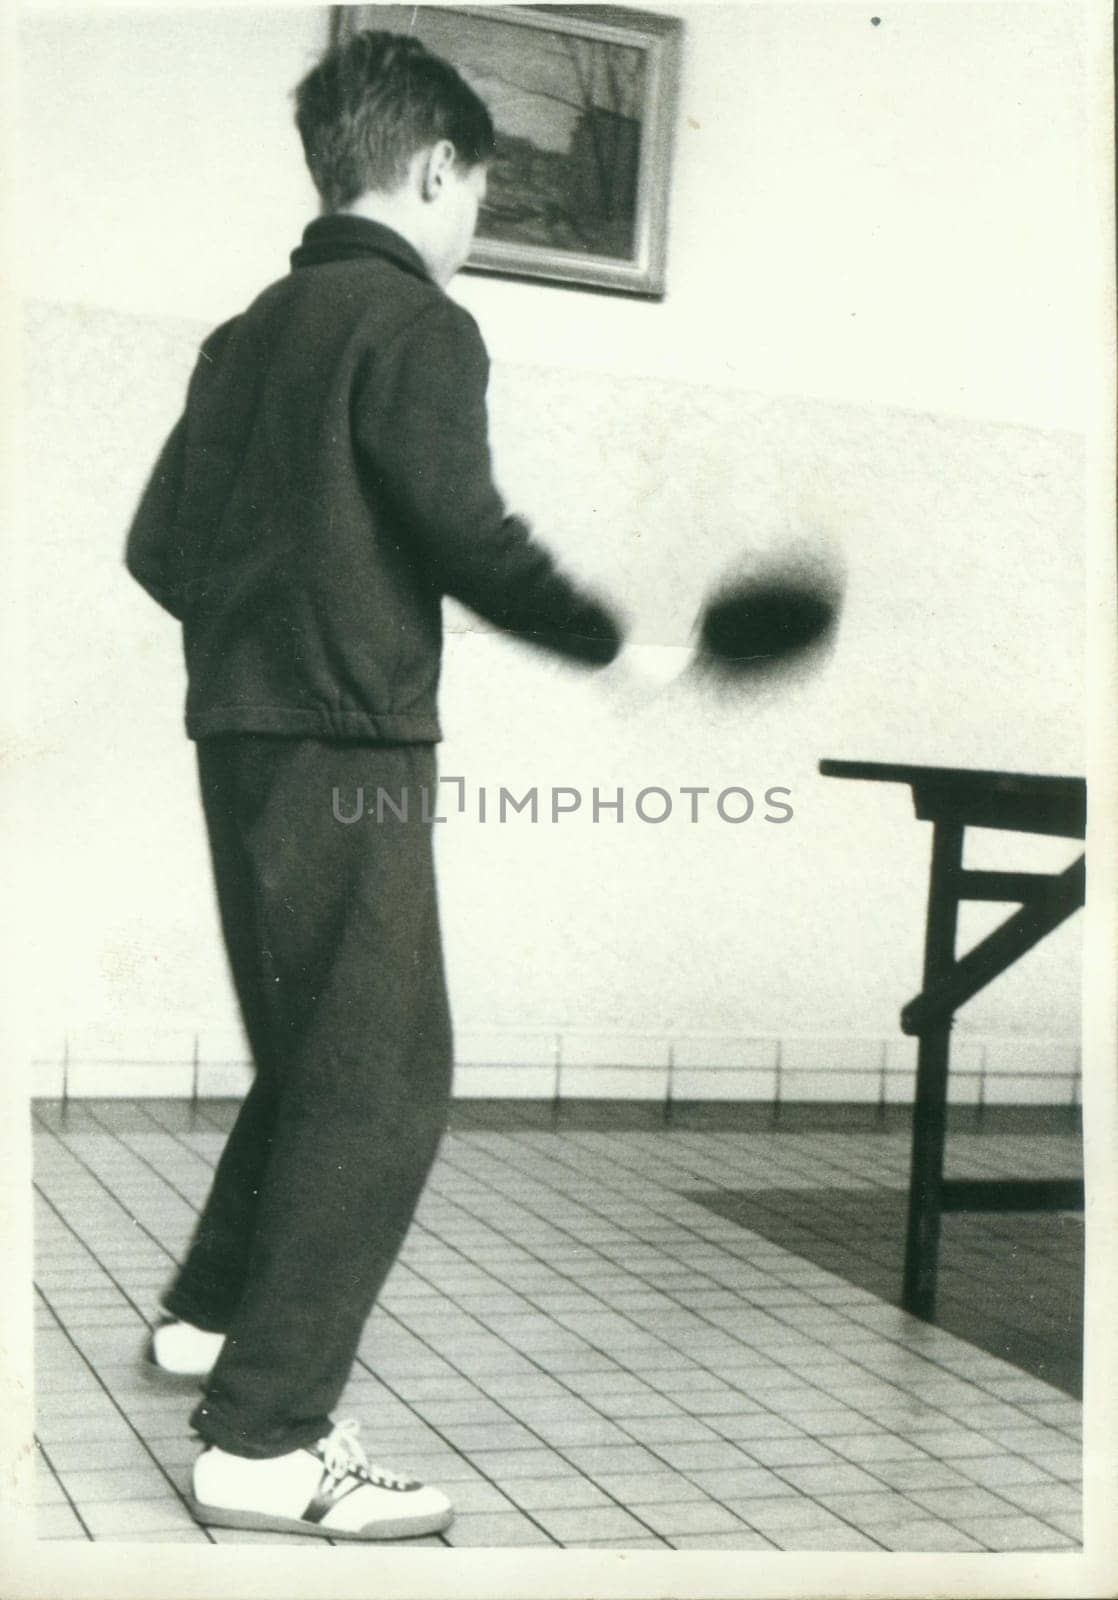 Retro photo shows young boy plays table tennis - ping-pong. Vintage black and white photography. by roman_nerud